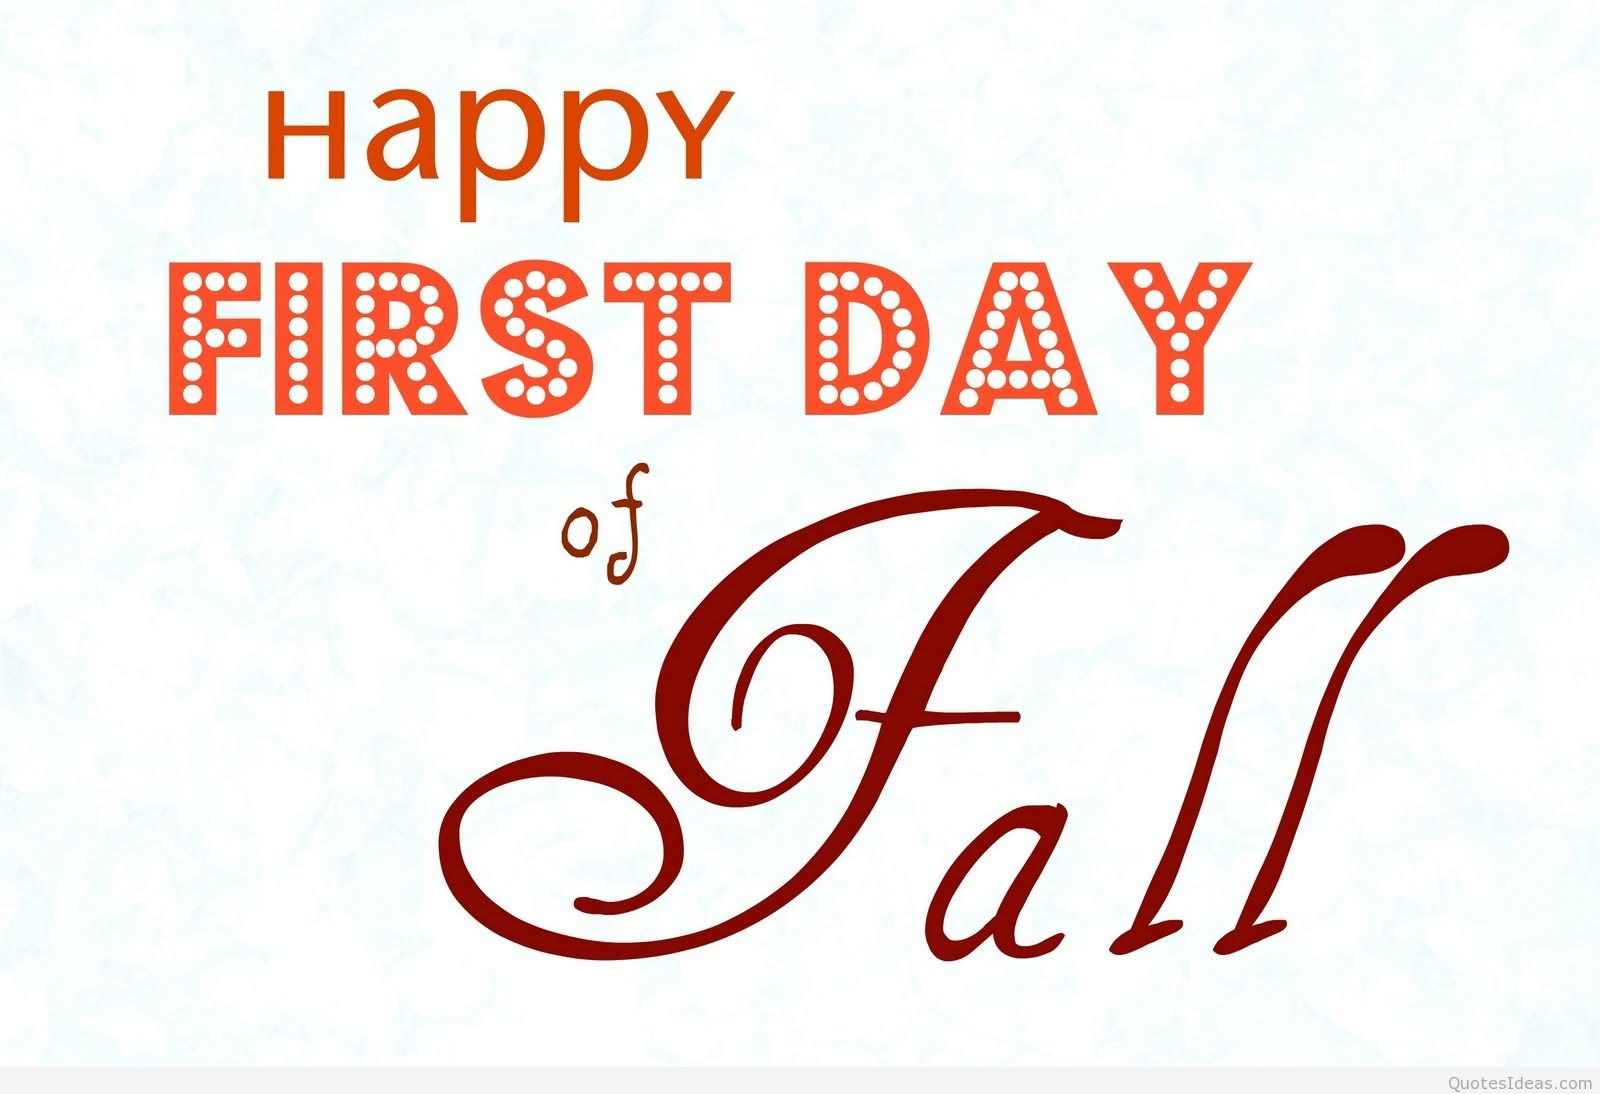 Happy First Day of Fall Greeting Card